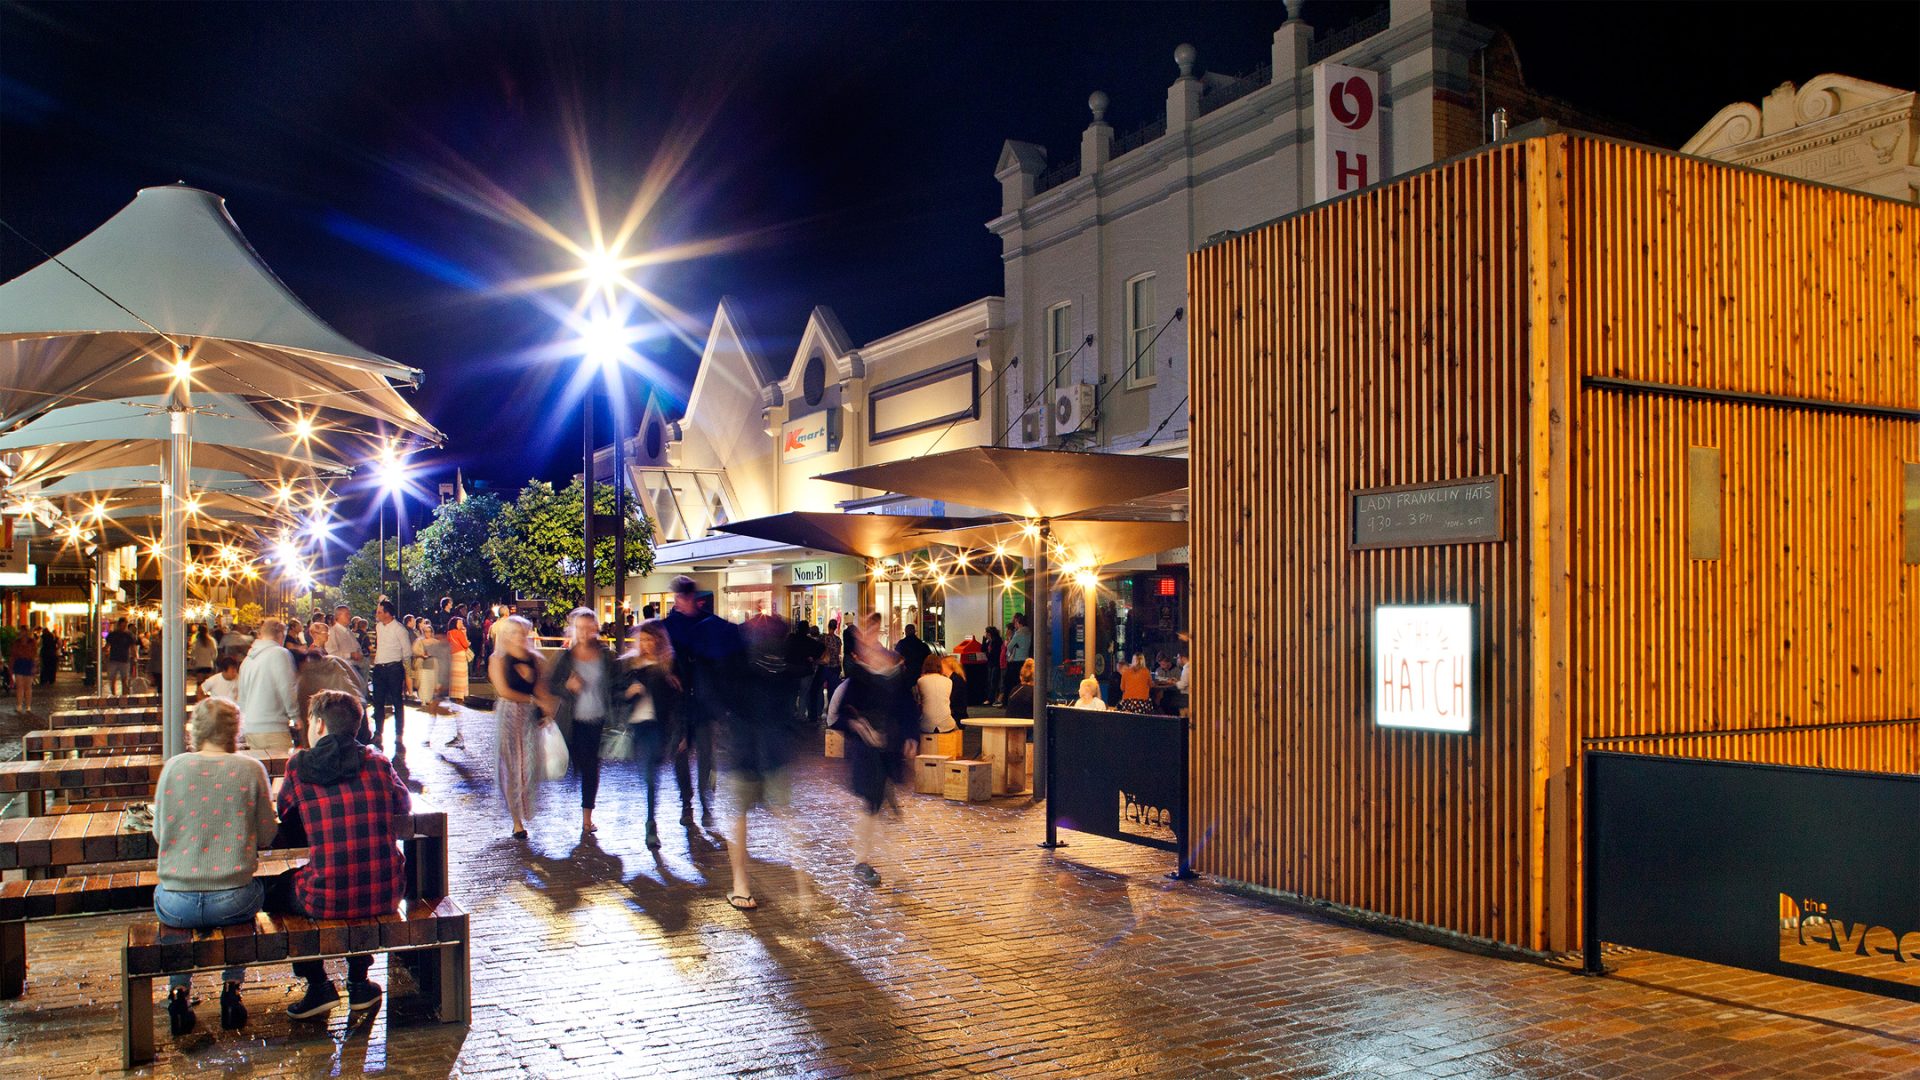 A bustling Maitland street at night with numerous people walking and sitting on benches. The street is lined with shops and restaurants, some with outdoor seating. Bright lights and lanterns illuminate the area, giving it a lively atmosphere. A wooden structure is prominently visible by the levee.